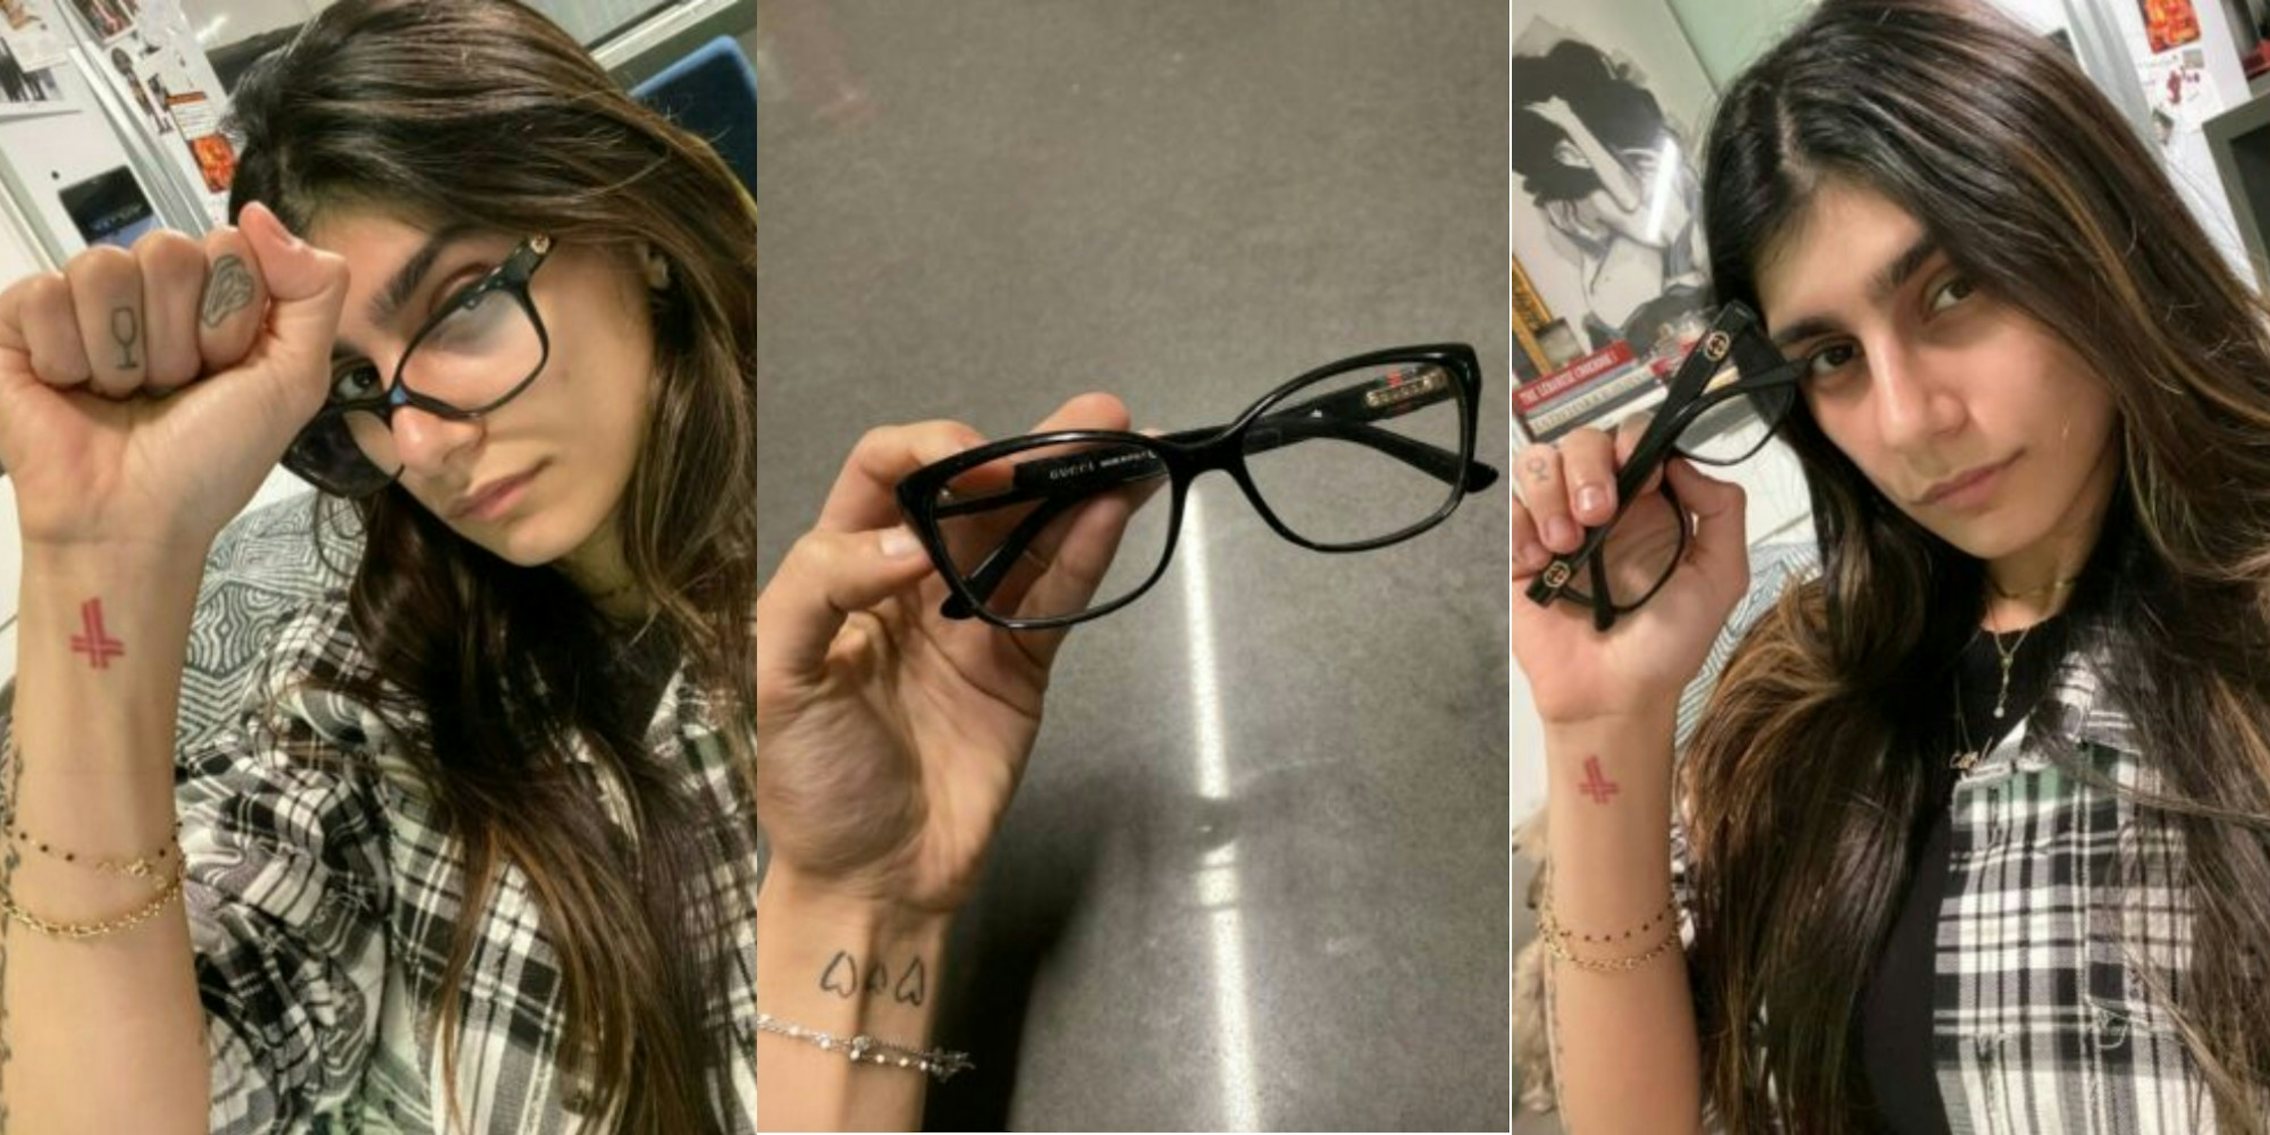 Glasses Mia - Mia Khalifa Is Auctioning Glasses From Porn to Raise Money for Beirut